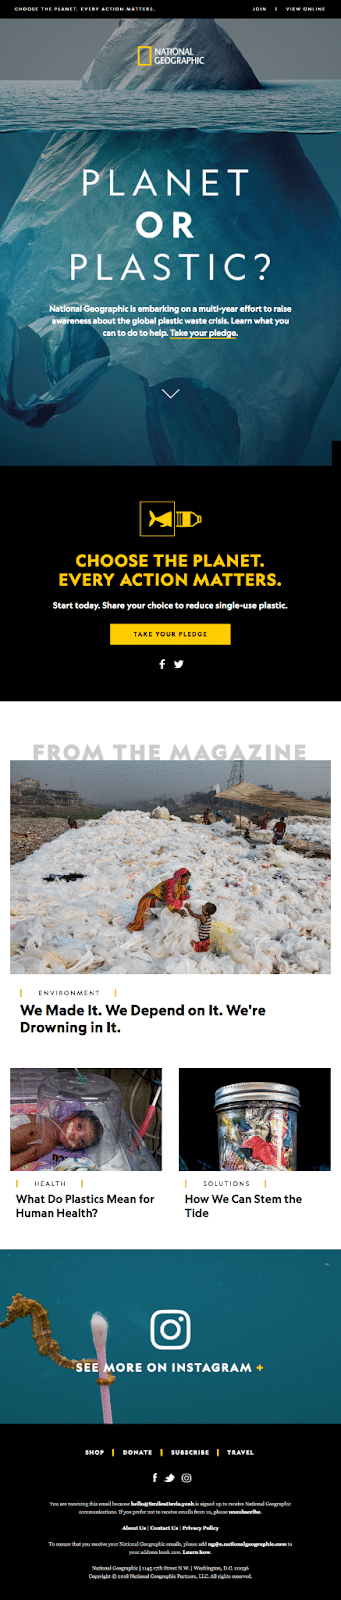 Exemple de newsletter National Geographic